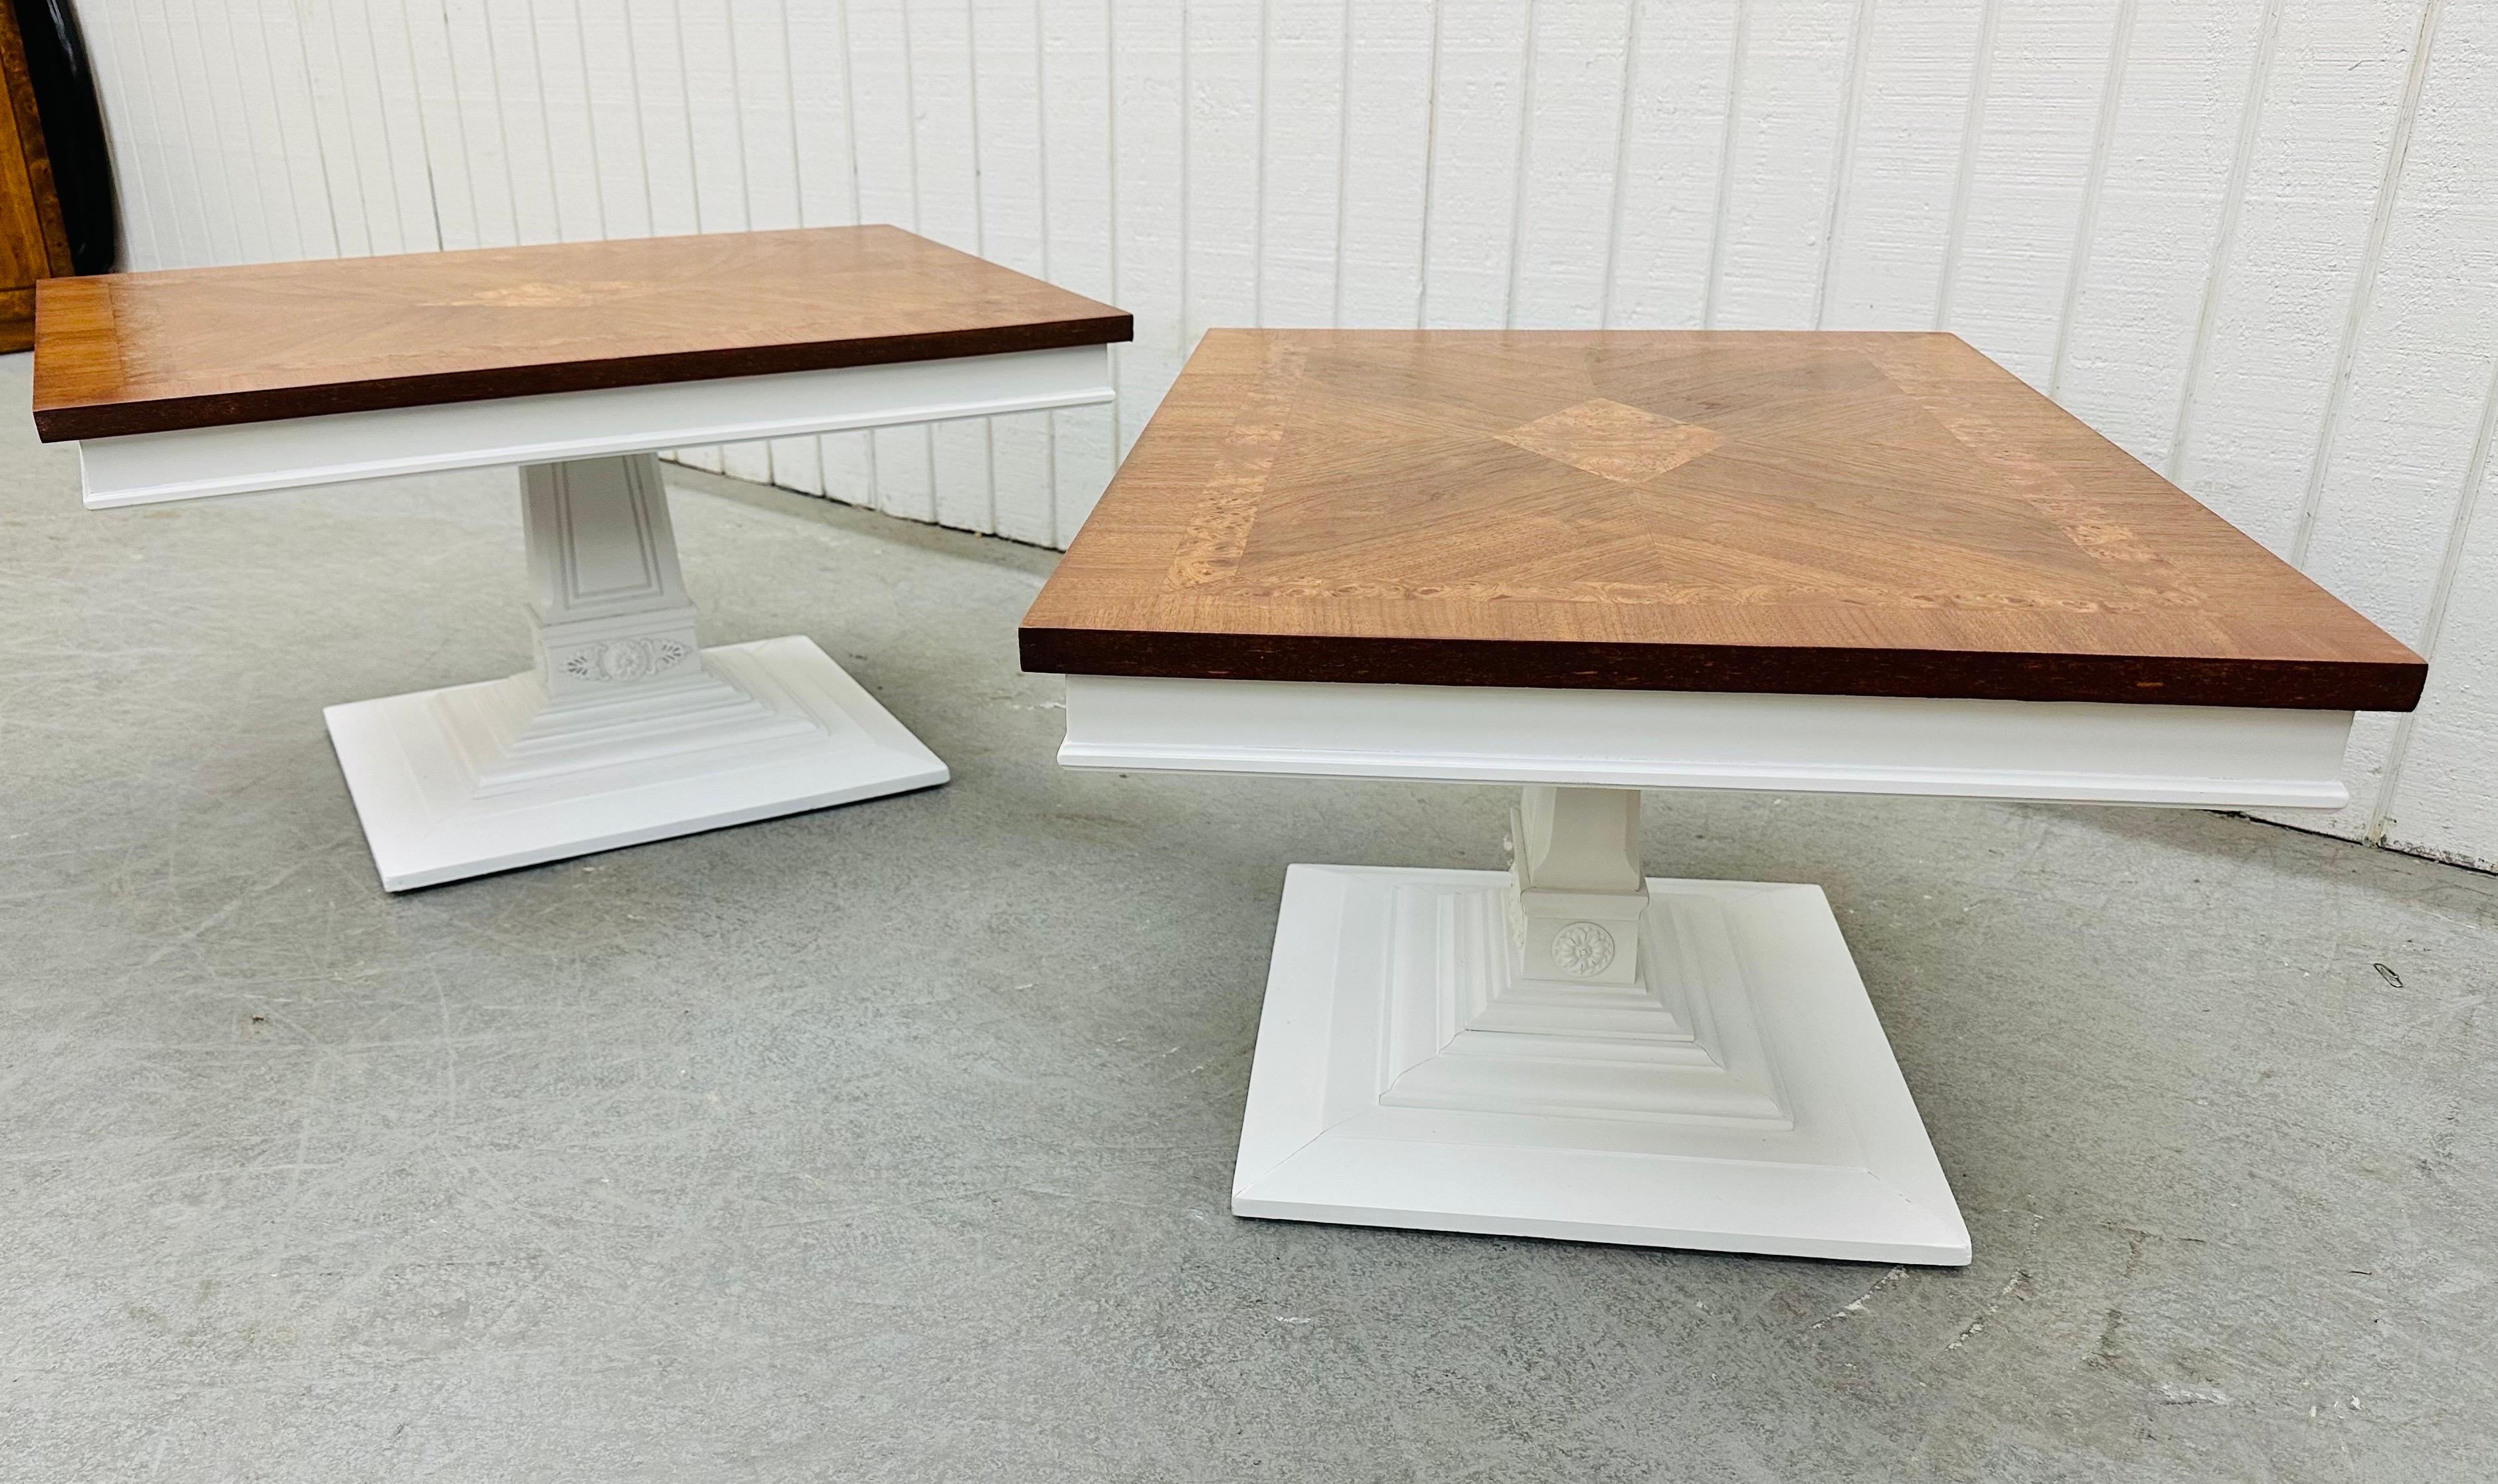 Vintage Burled Walnut Side Tables - Set of 2 In Good Condition For Sale In Clarksboro, NJ